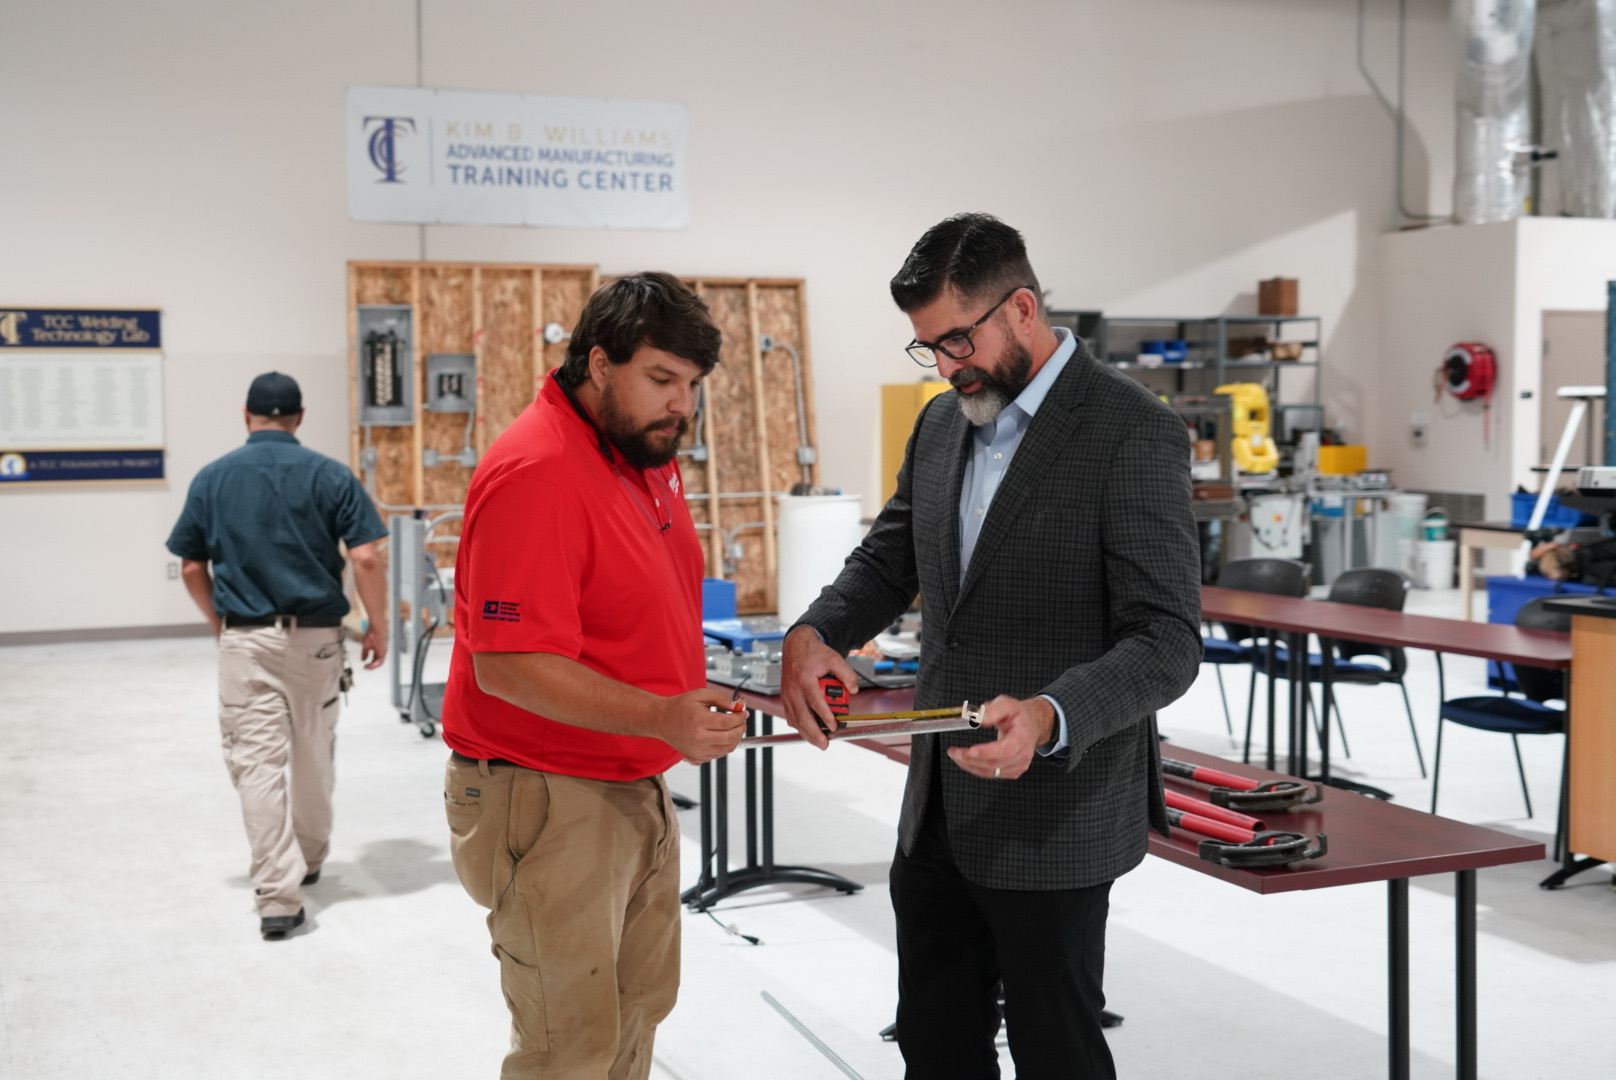 Commissioner Diaz visiting Tallahassee Community College to see their Electrical Apprenticeship Program in action